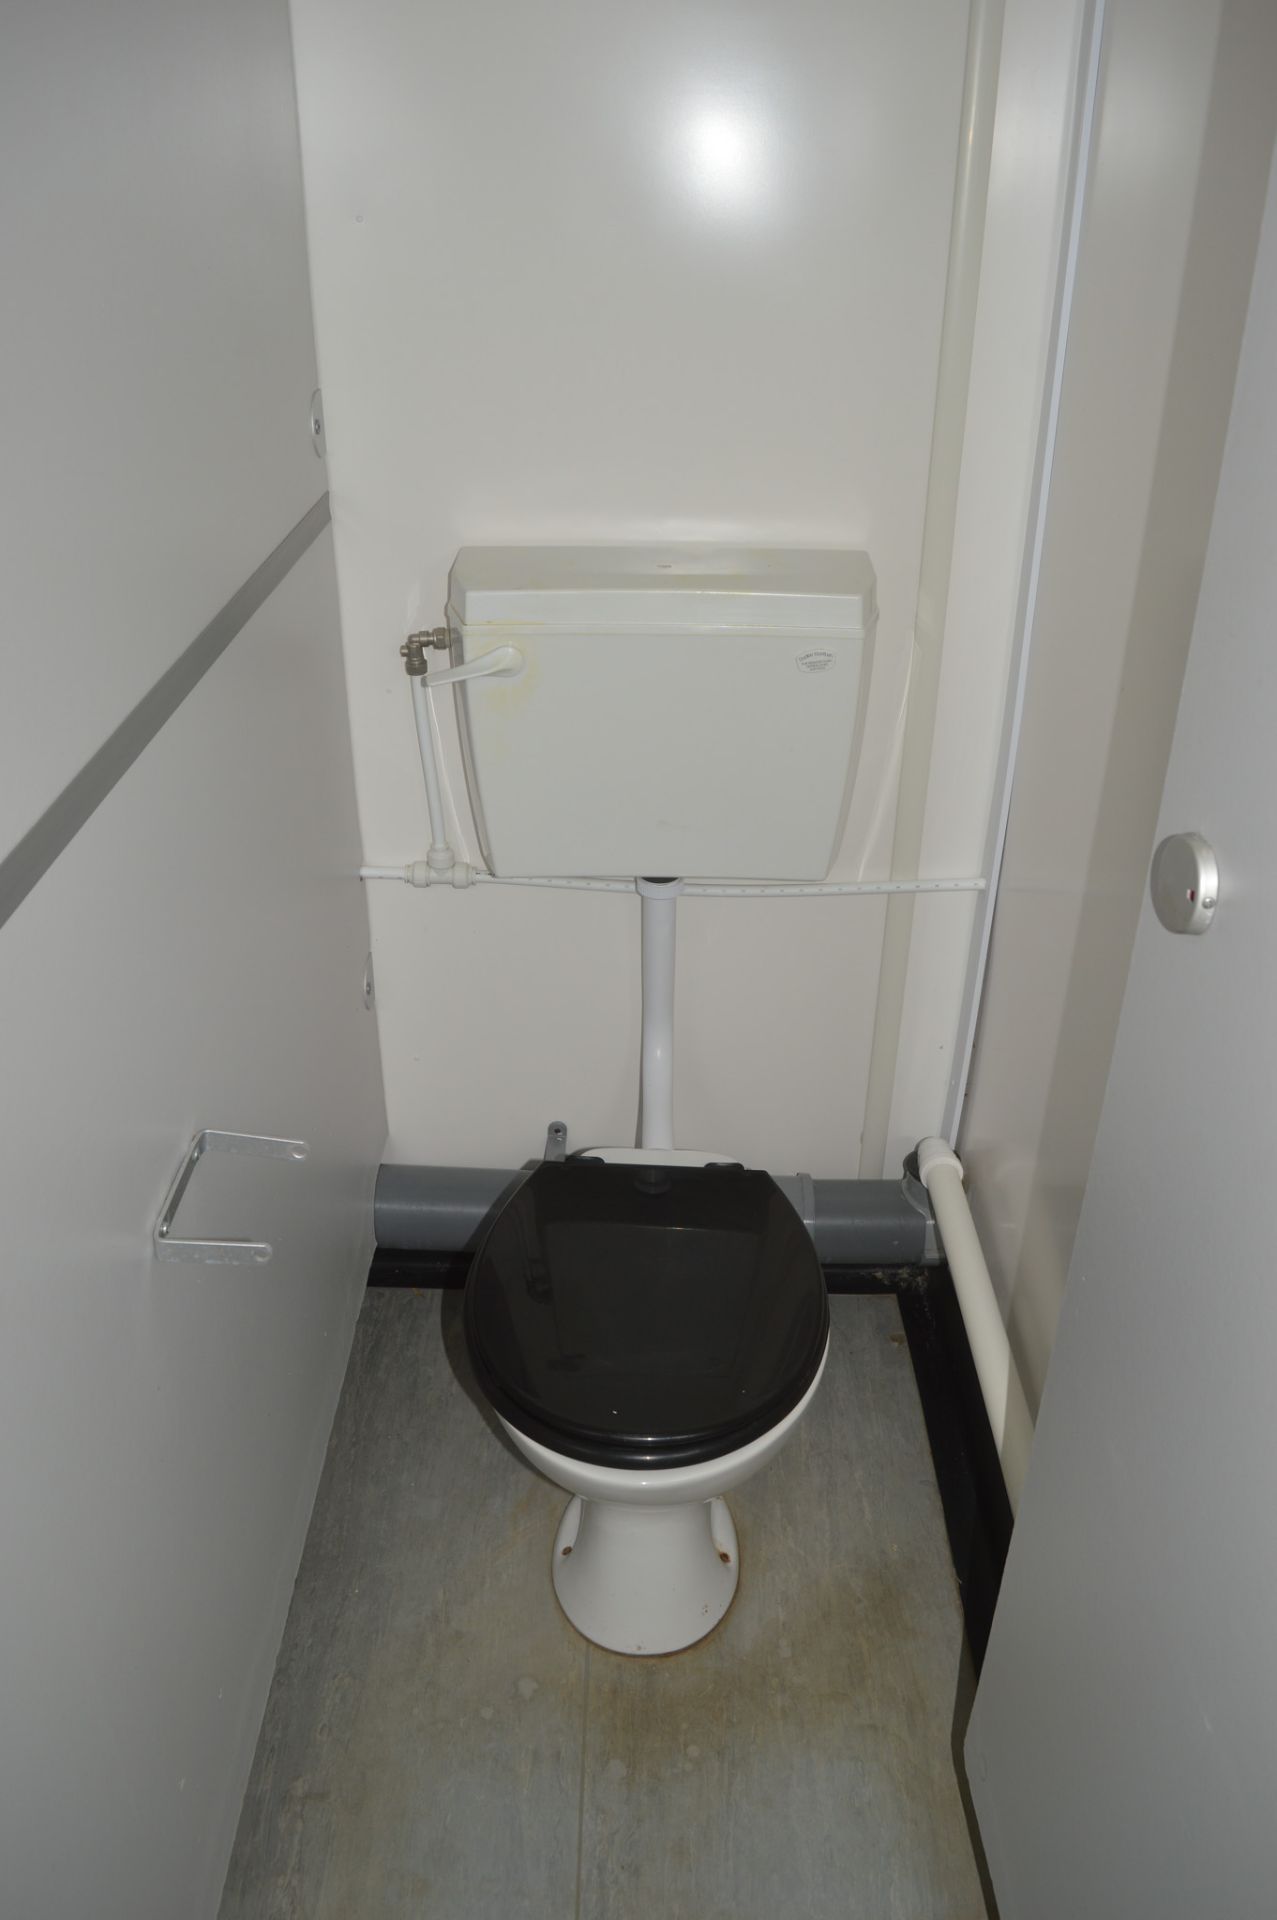 12 ft x 8 ft jack leg steel anti vandal toilet block  Comprising 2 cubicle toilets, 2 urinals and - Image 8 of 8